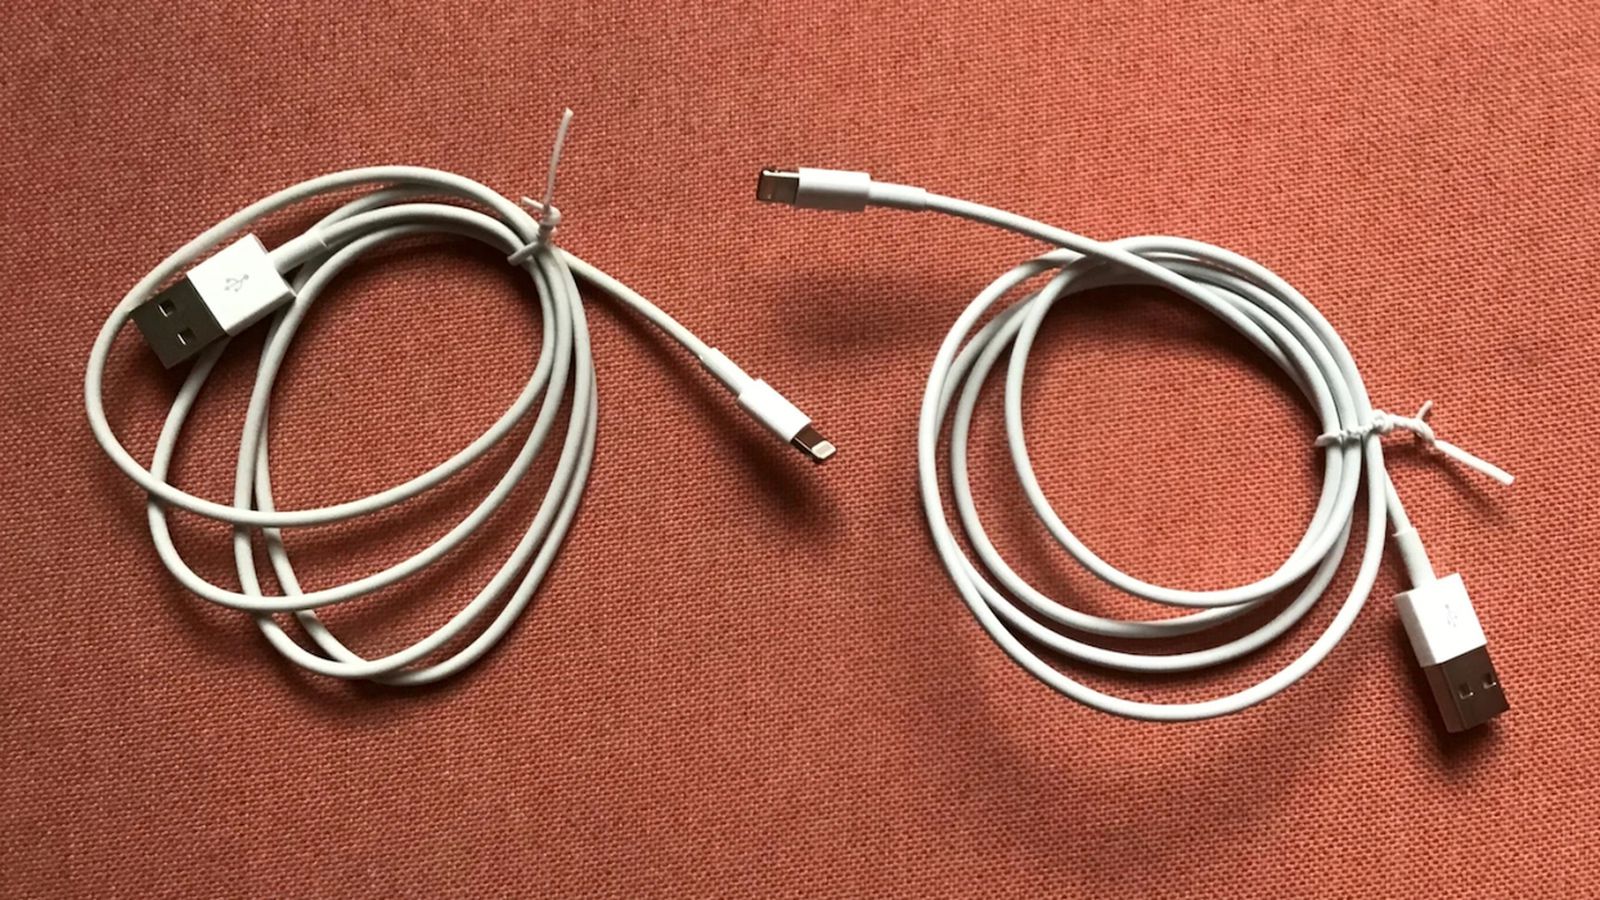 Security Researcher Develops Lightning Cable With Hidden Chip to Steal Passwords